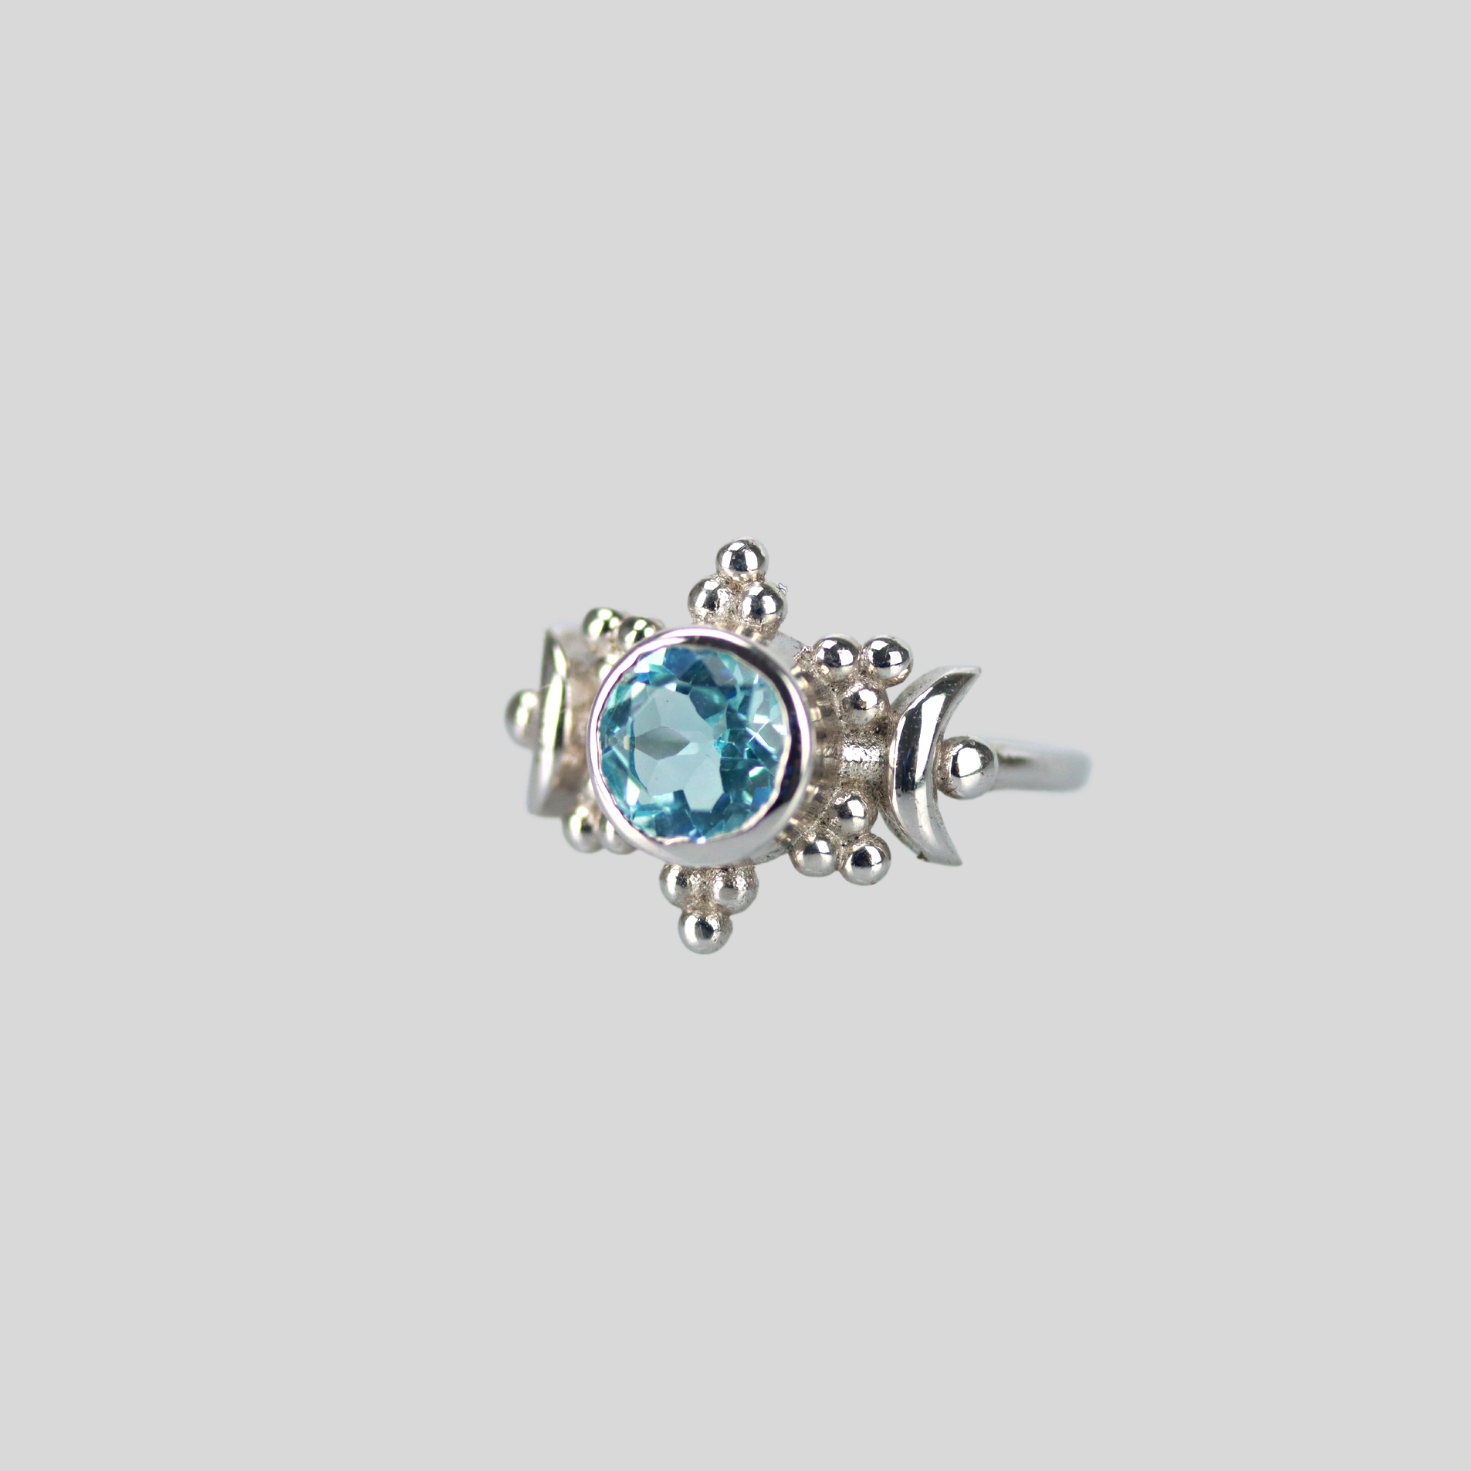 The sun moon ring in blue topaz